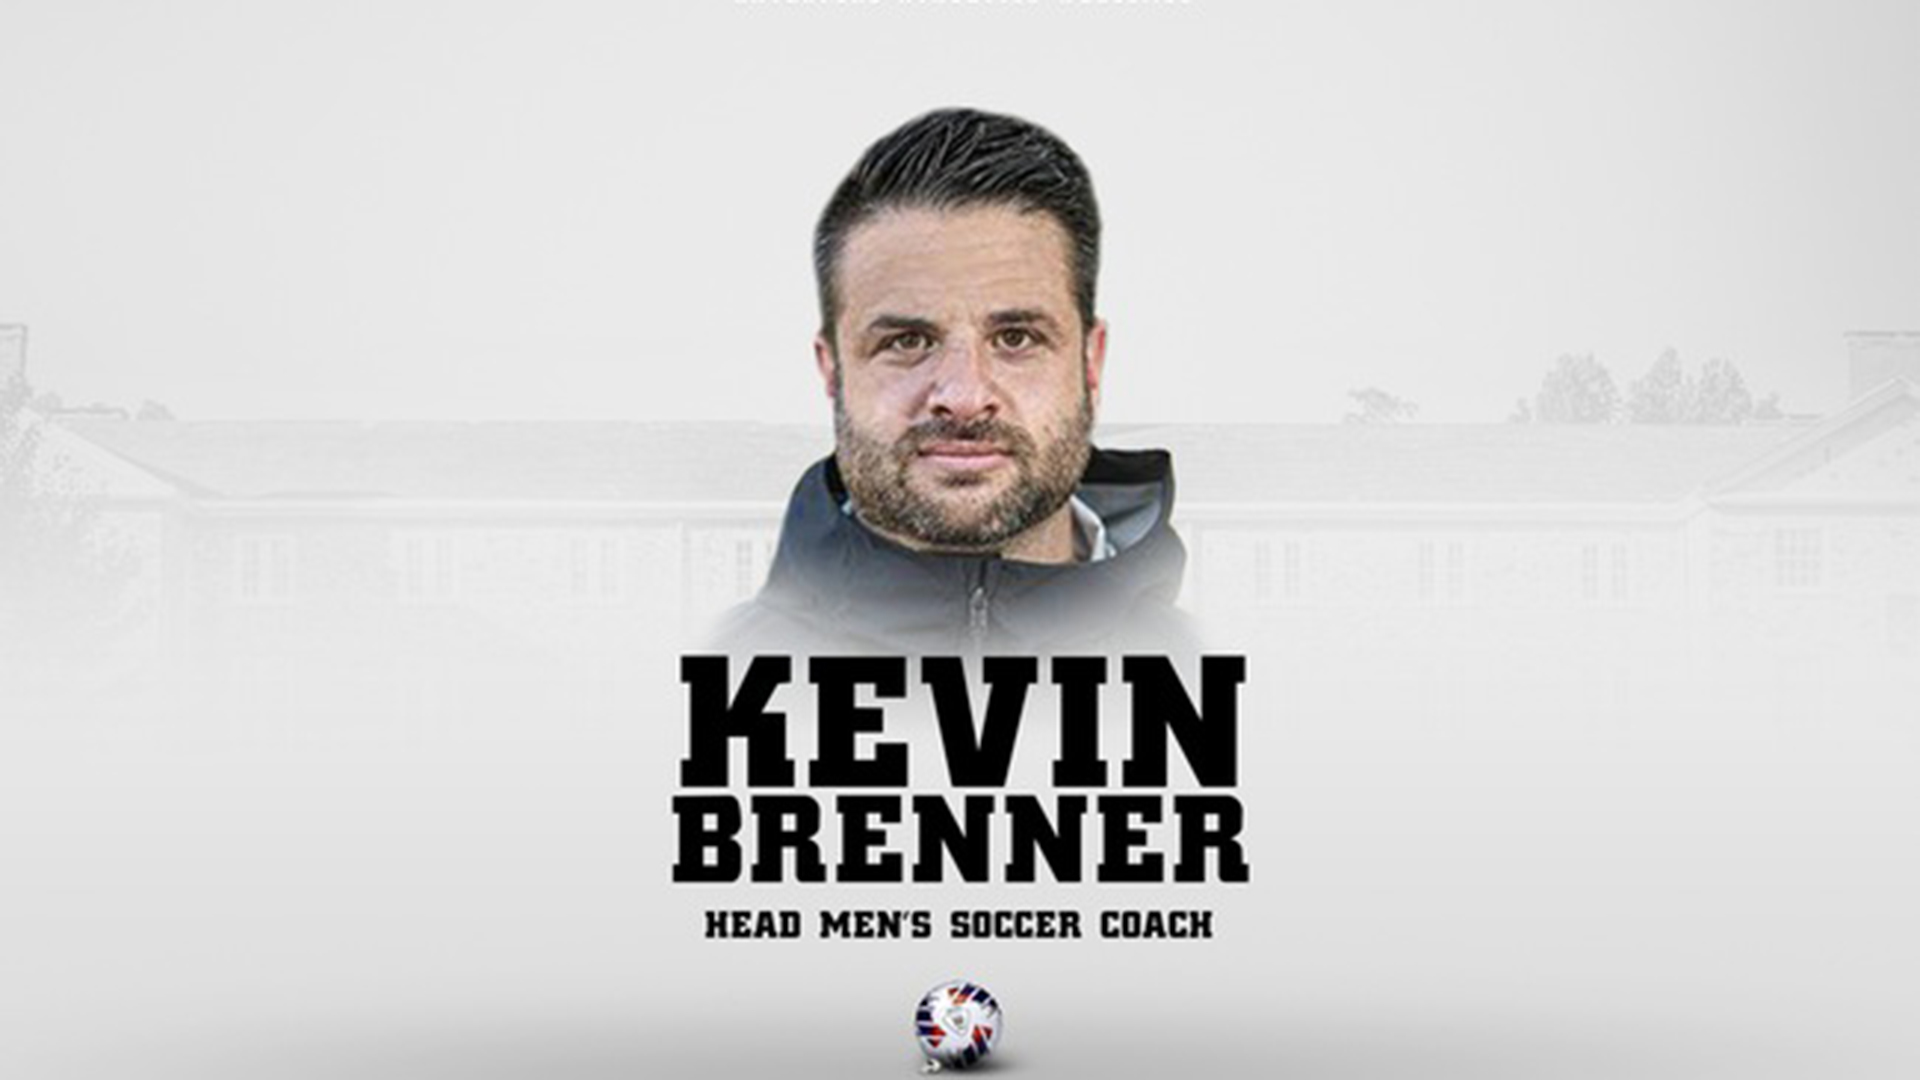 Brenner Has Interim Tag Lifted at Haverford